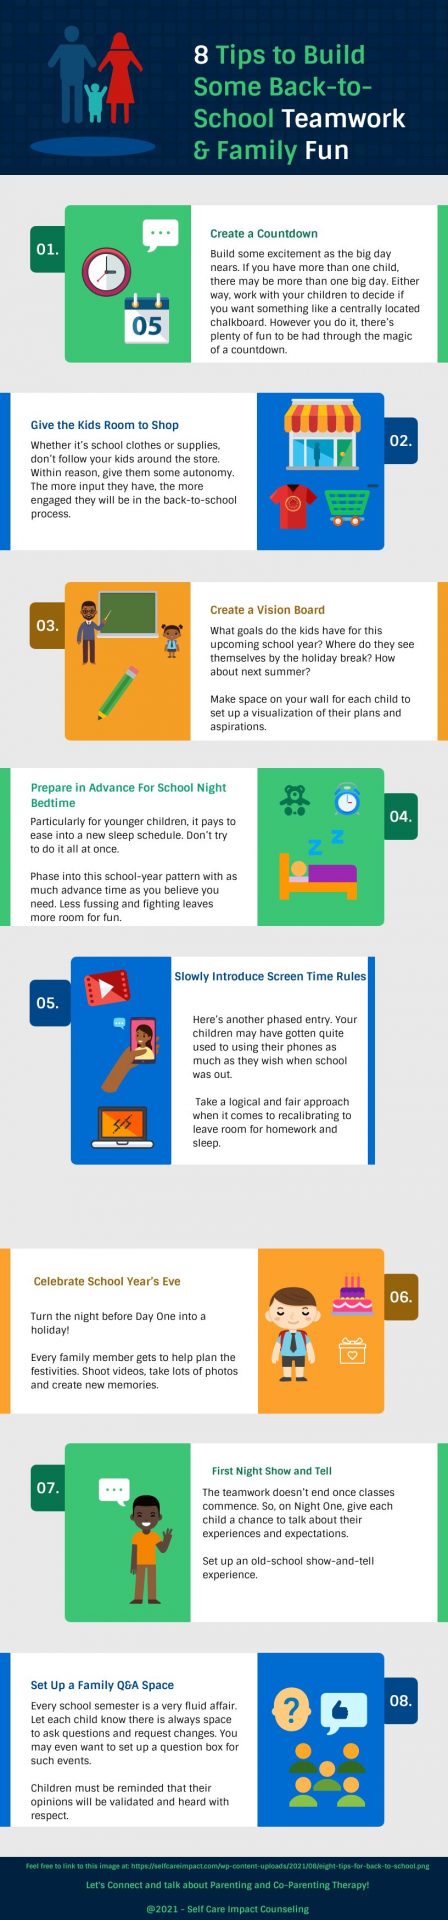 back to school infographic